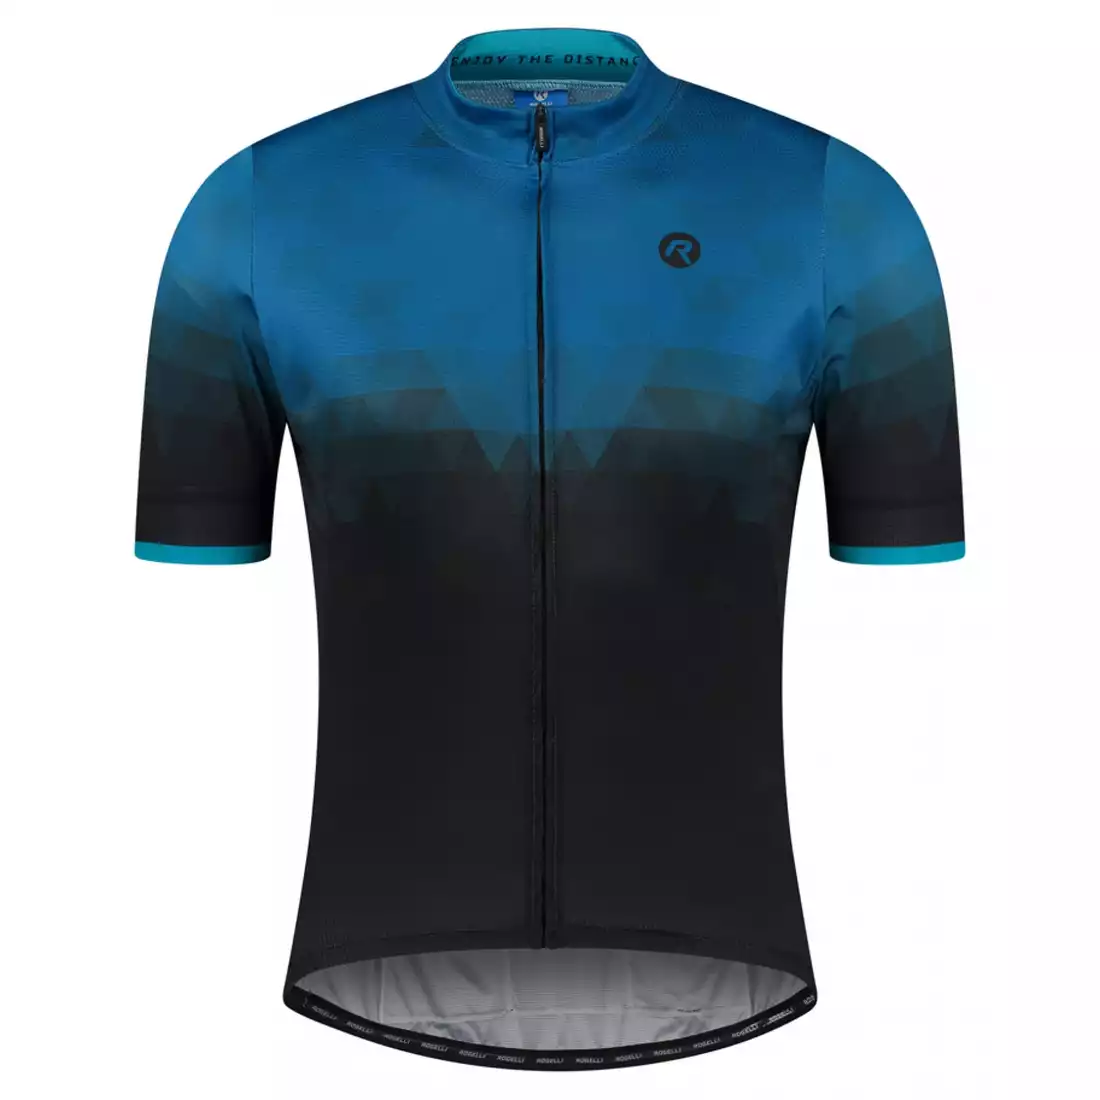 ROGELLI SPHERE Men's cycling jersey, black and blue